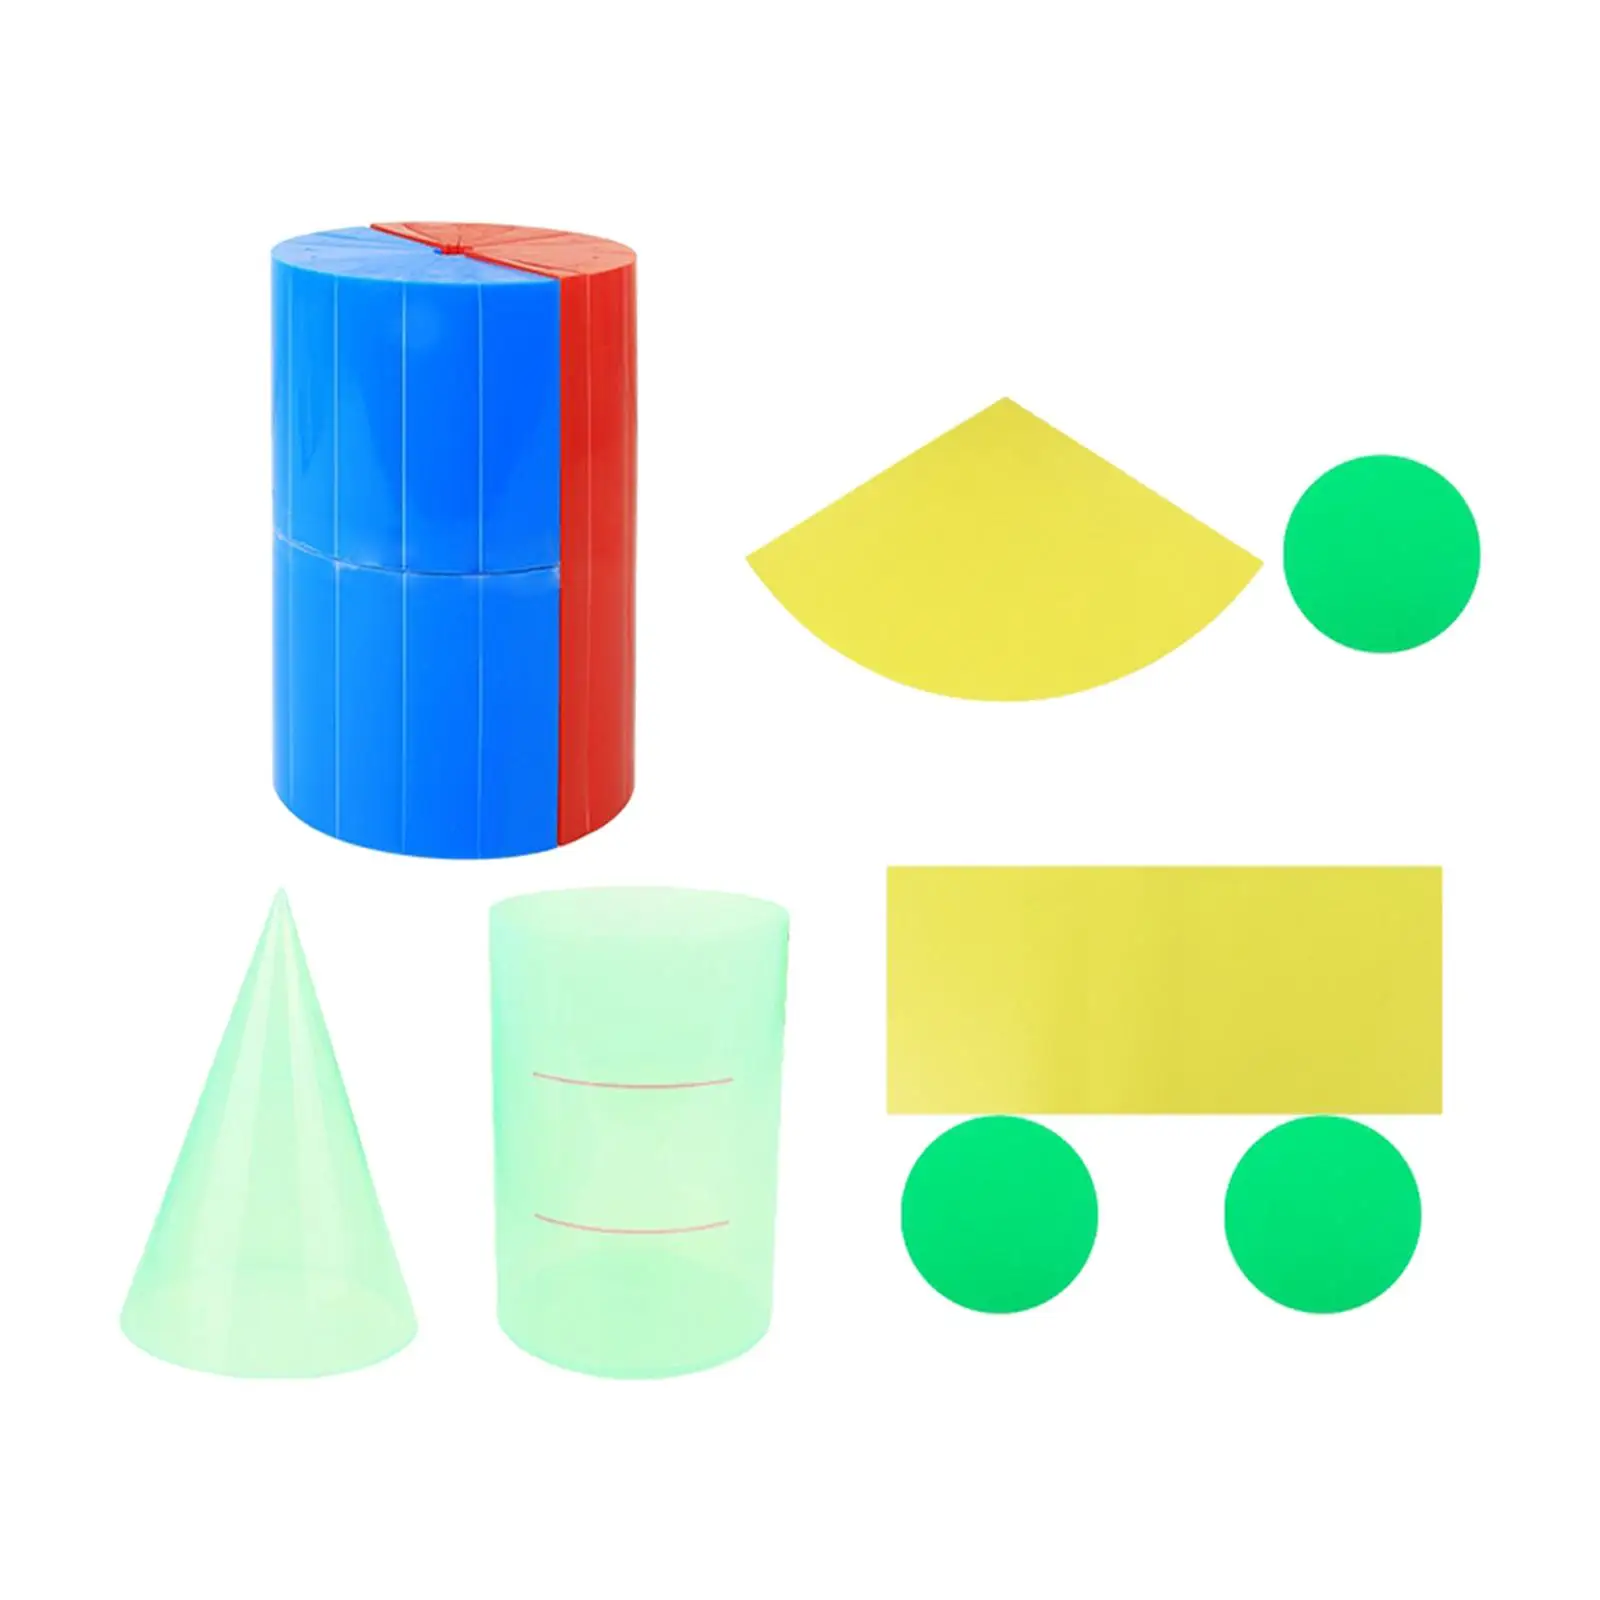 3D Shapes Geometric Educational Toy Learning Material Mathematics Teaching Aids Geometric Shapes for Children Boys Holiday Gifts